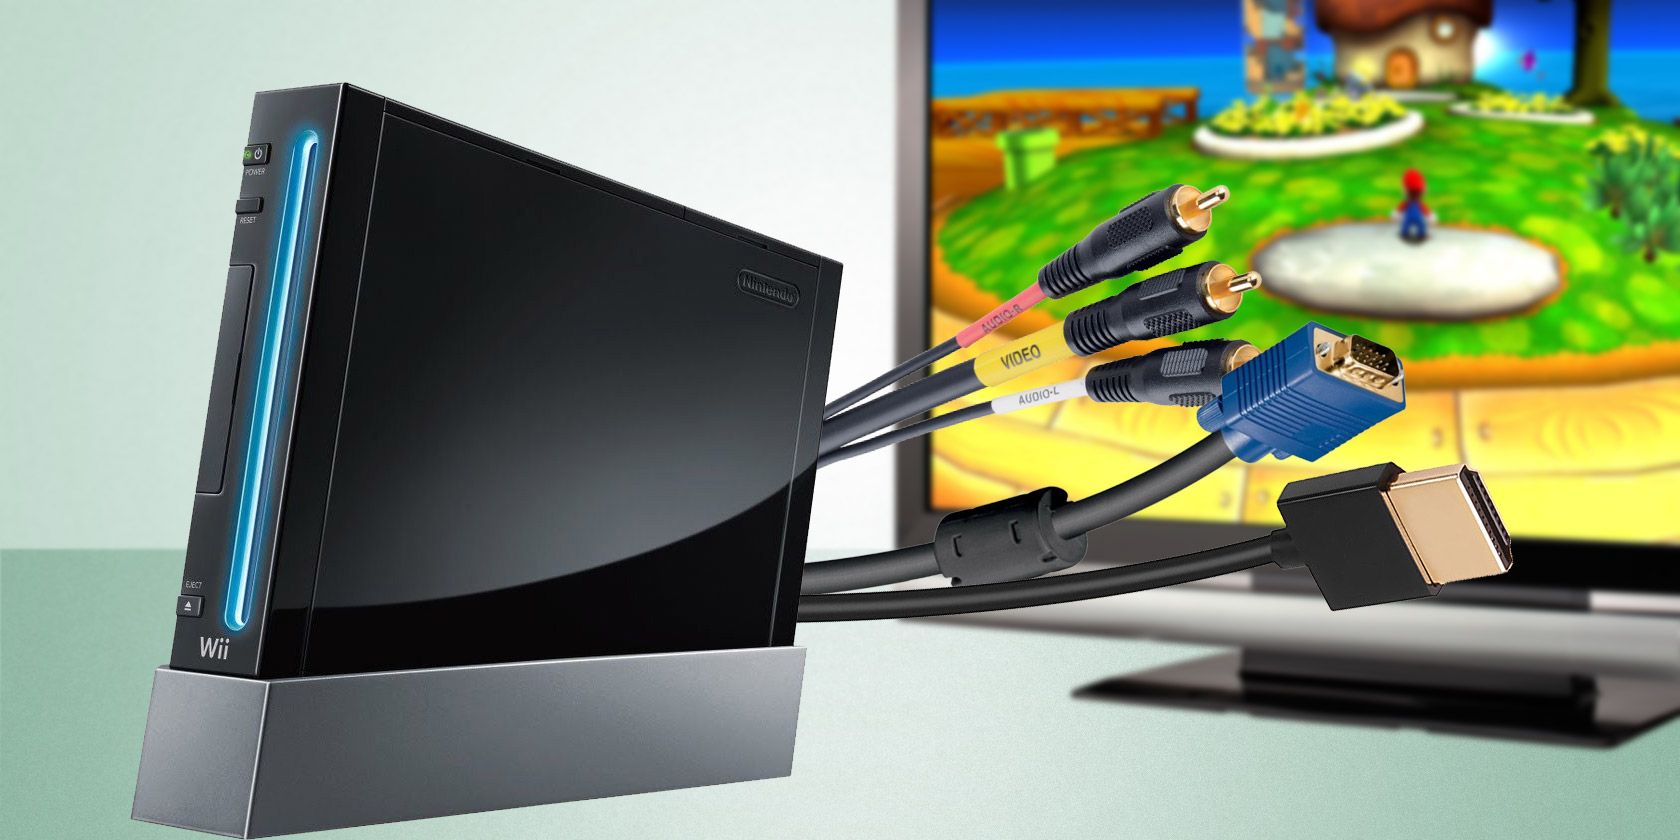 Cornwall cricket Endure How to Connect Your Nintendo Wii to Any Type of TV: 6 Ways